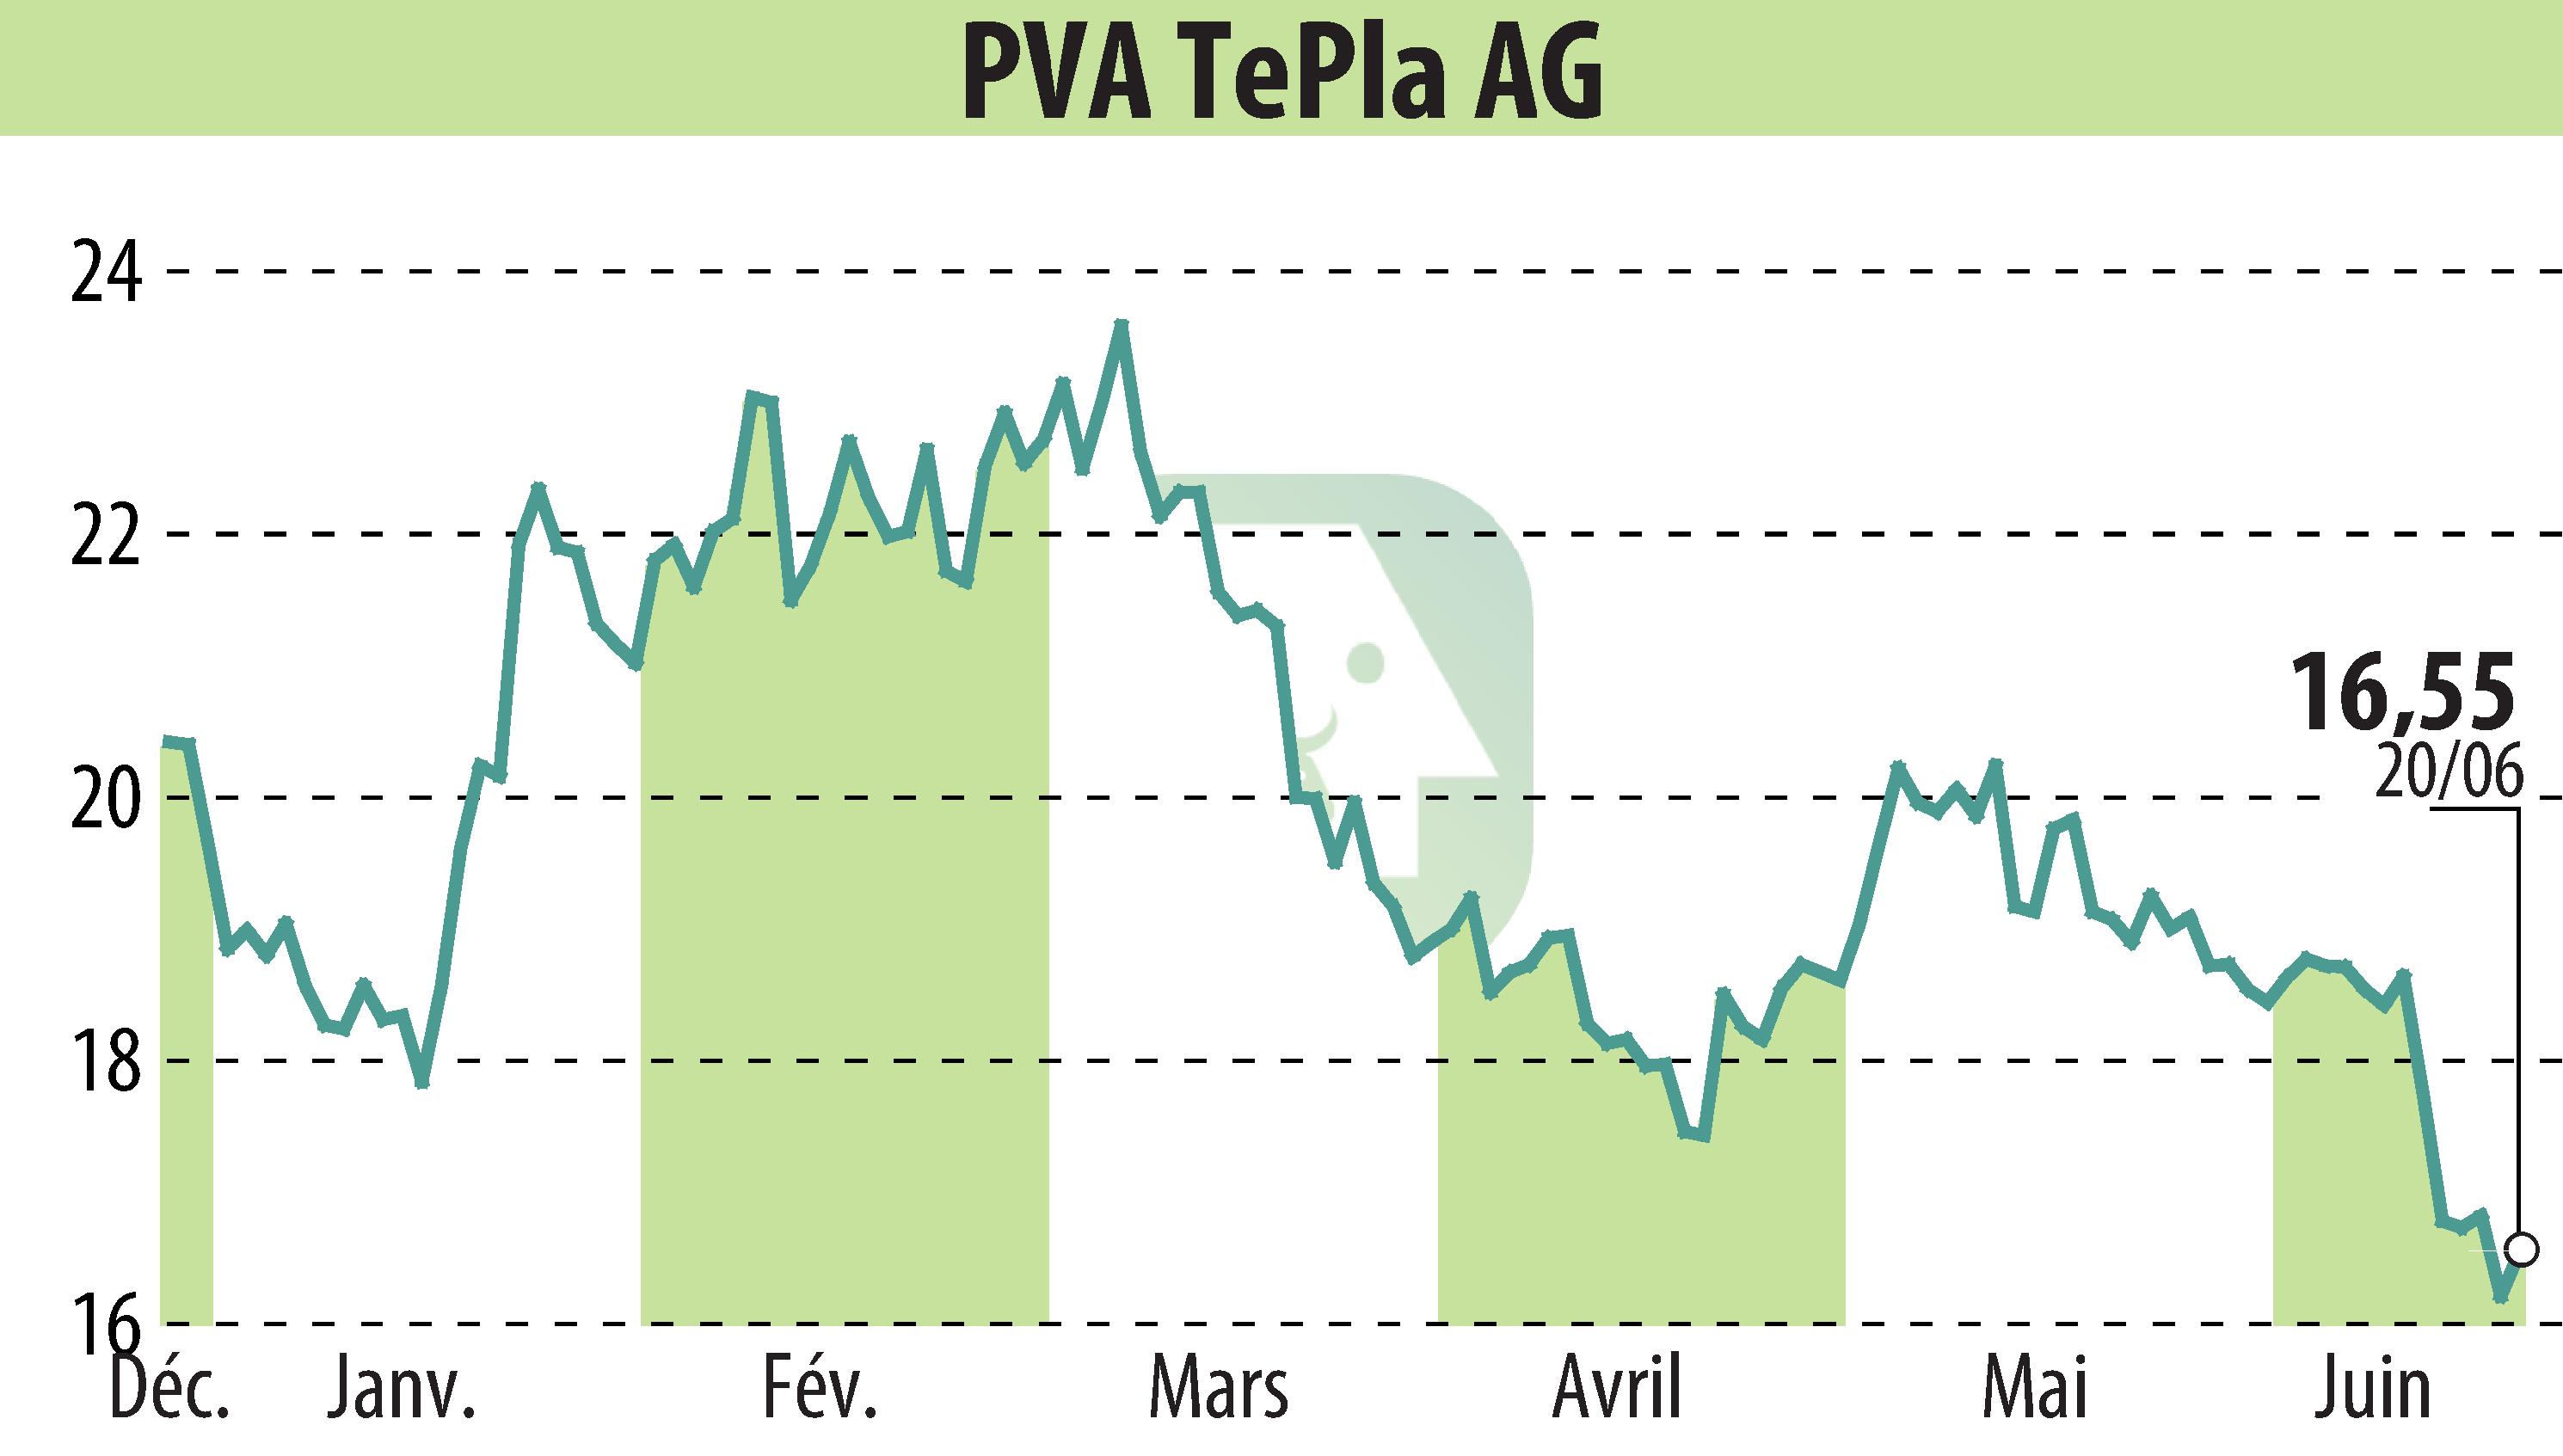 Stock price chart of PVA TePla AG (EBR:TPE) showing fluctuations.